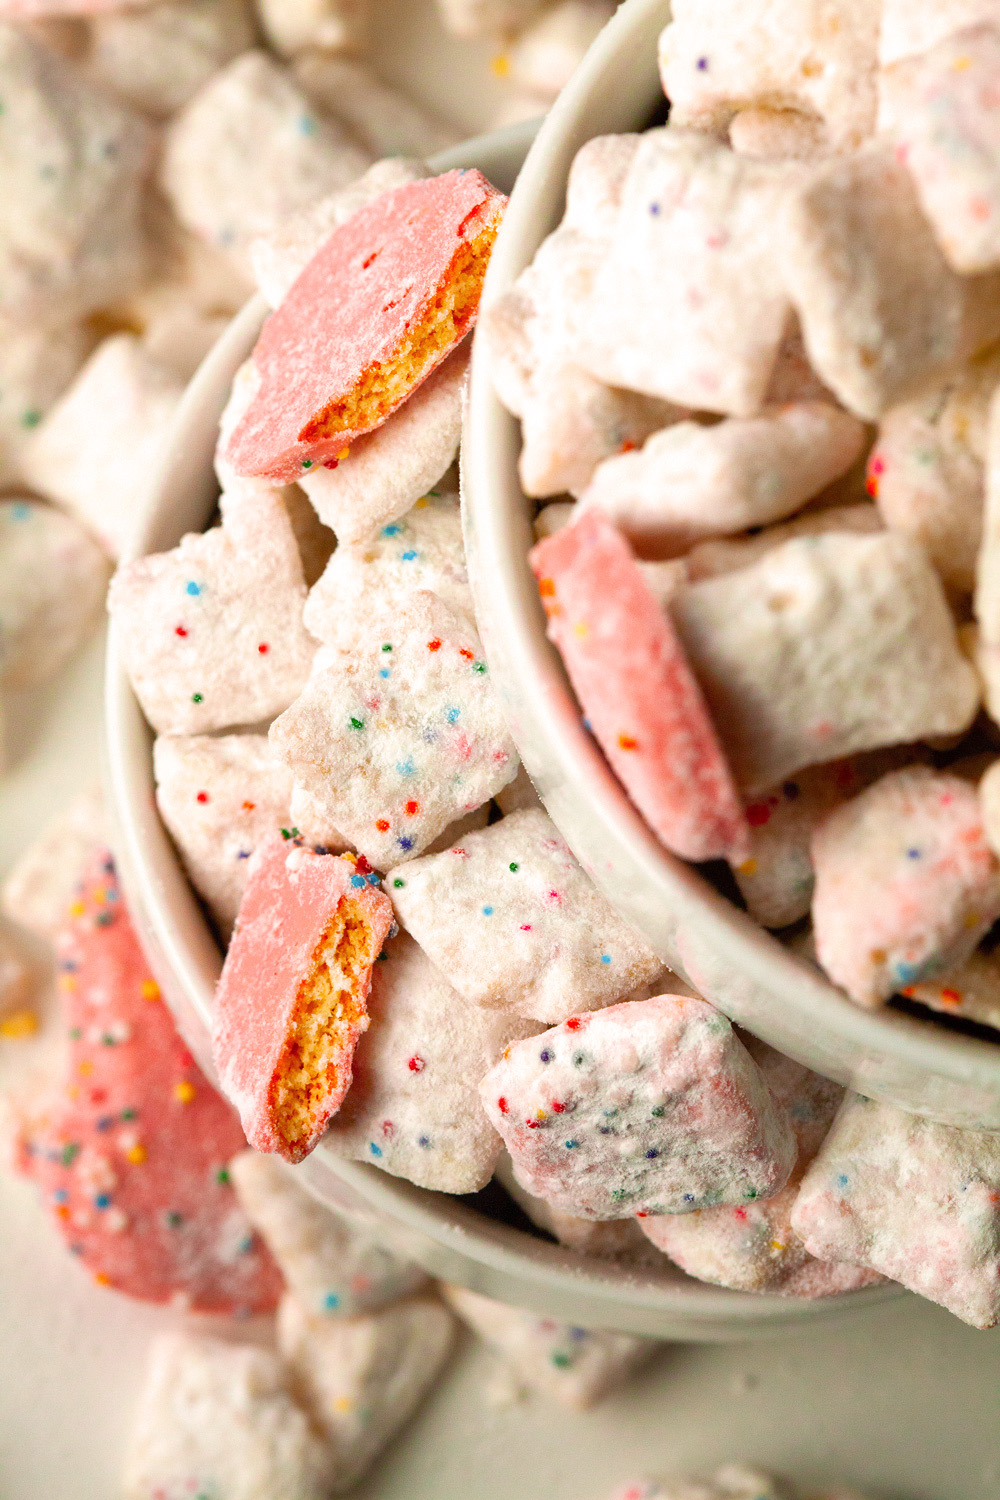 Frosted Animal Cracker Confetti Cake Muddy Buddies by Deliciously Yum!